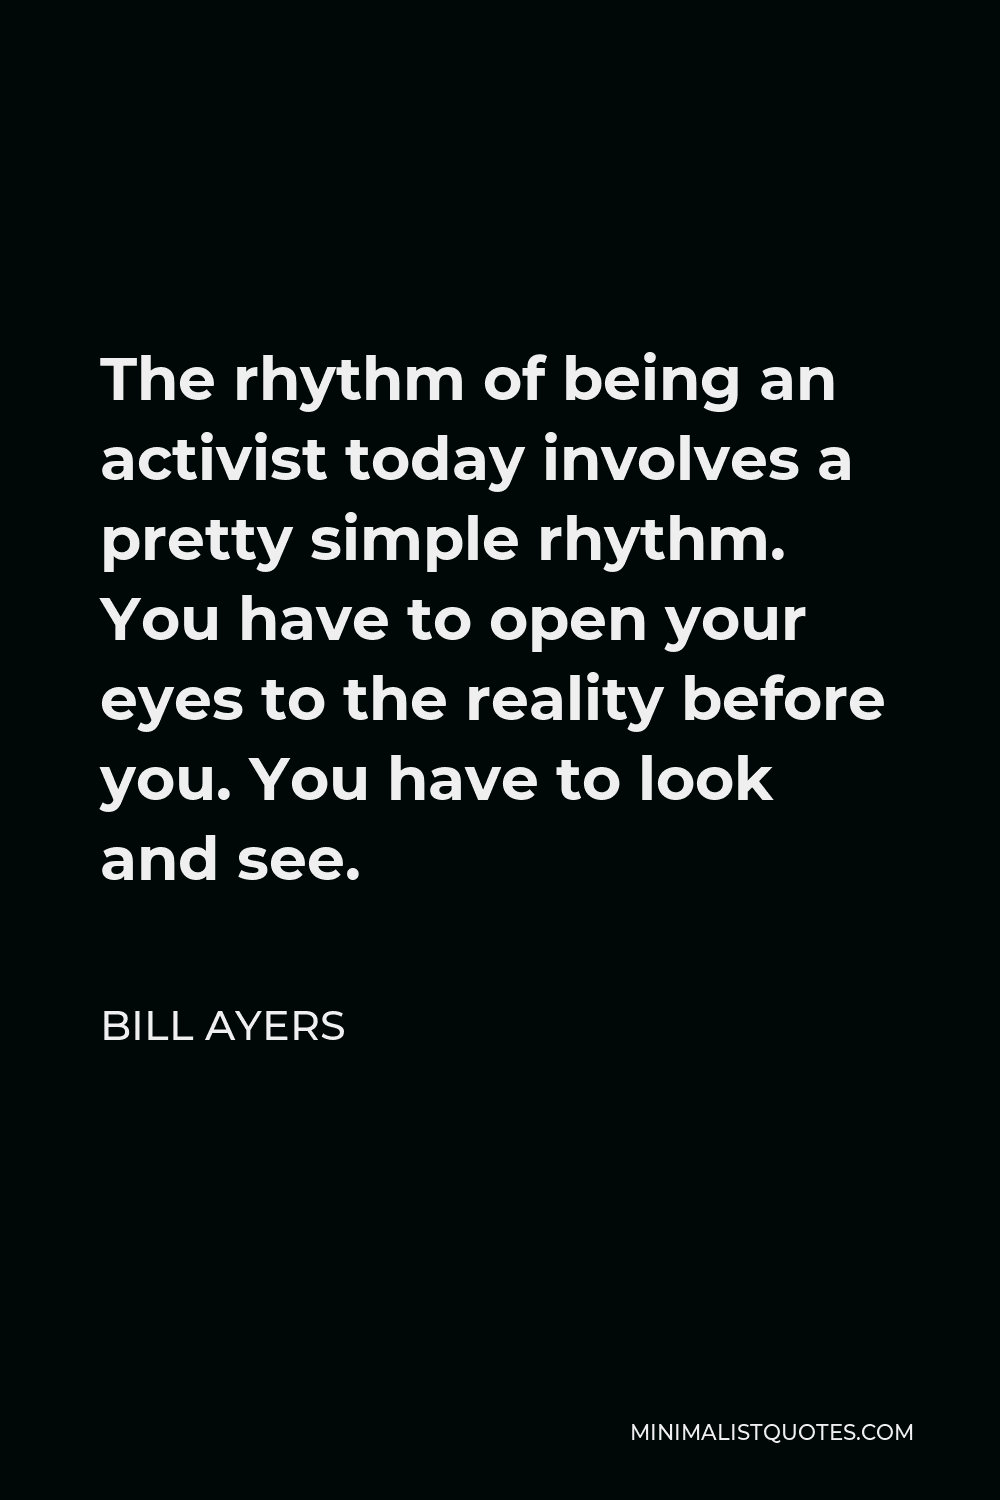 Bill Ayers Quote - The rhythm of being an activist today involves a pretty simple rhythm. You have to open your eyes to the reality before you. You have to look and see.